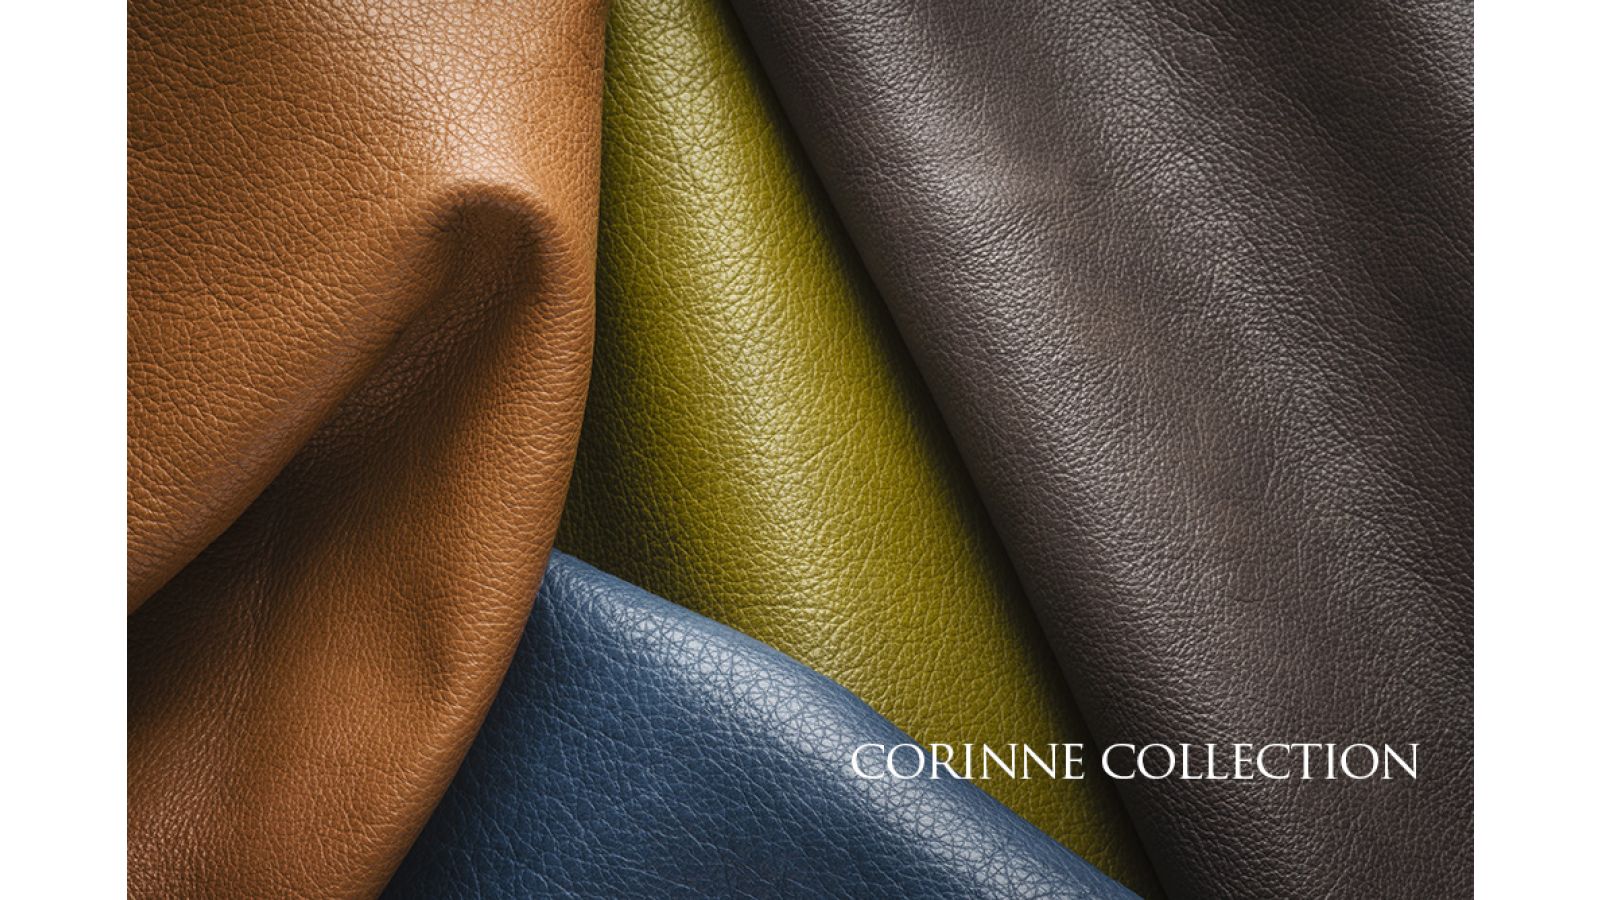 Corinne Collection